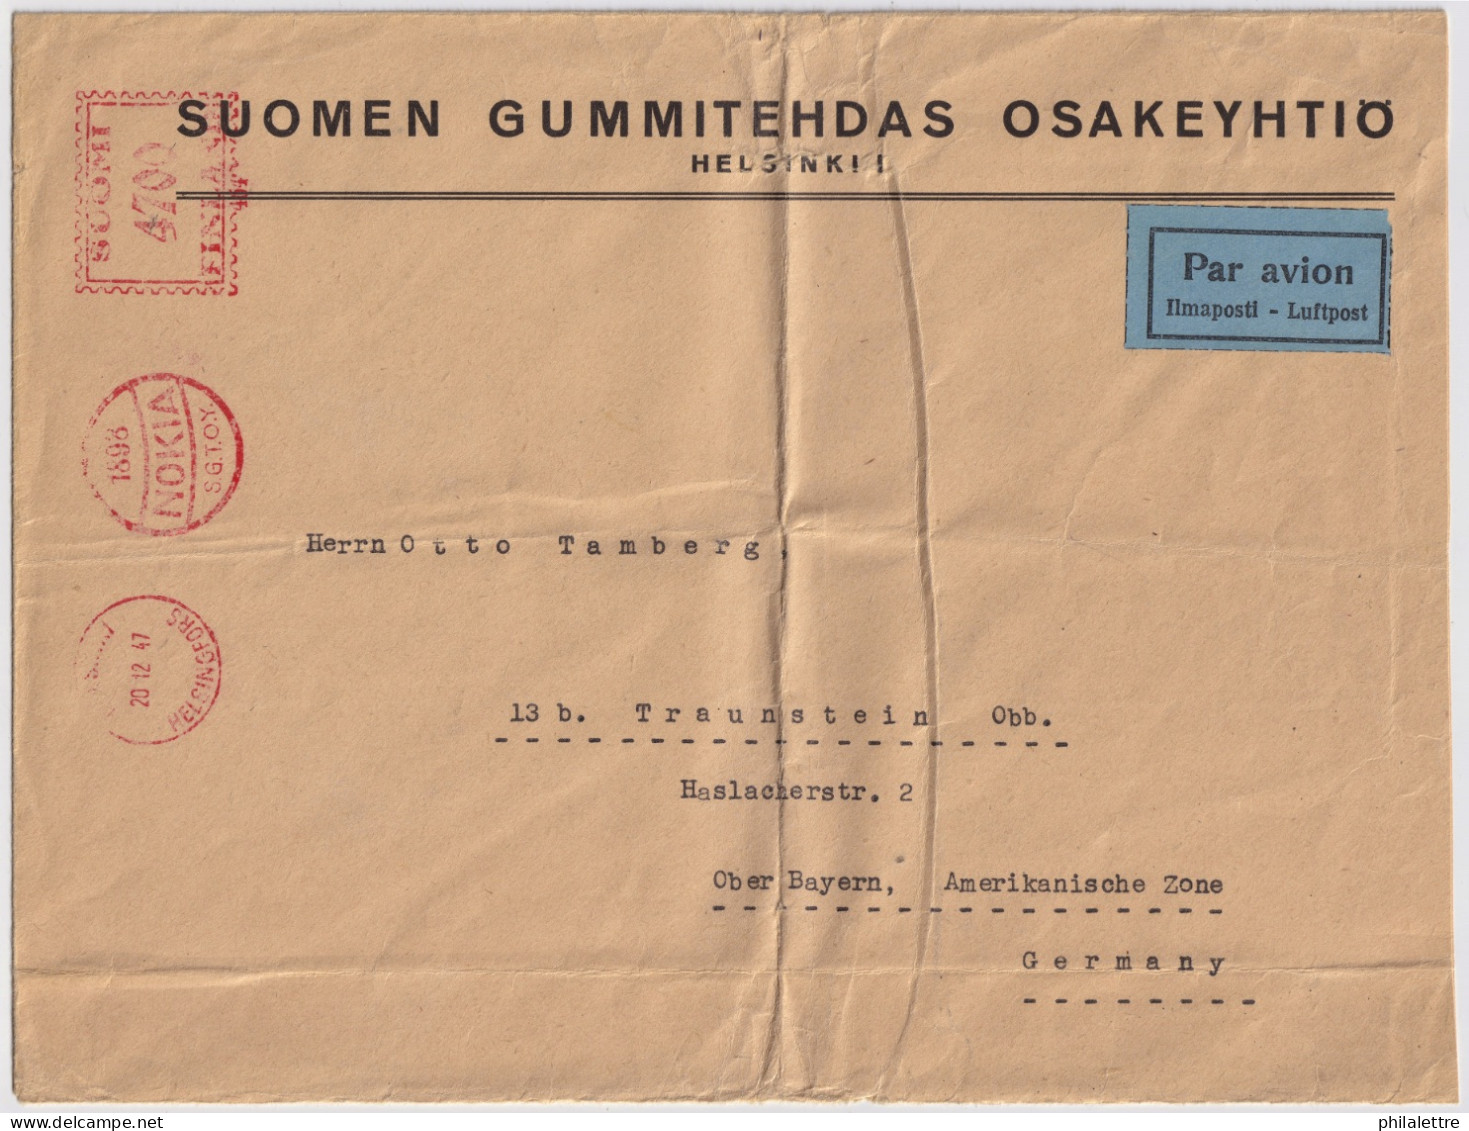 FINLAND - 1947 - "1898 / NOKIA / S.G..O.Y." Franking Mark (4700p) On Air Mail Cover To Germany - Briefe U. Dokumente